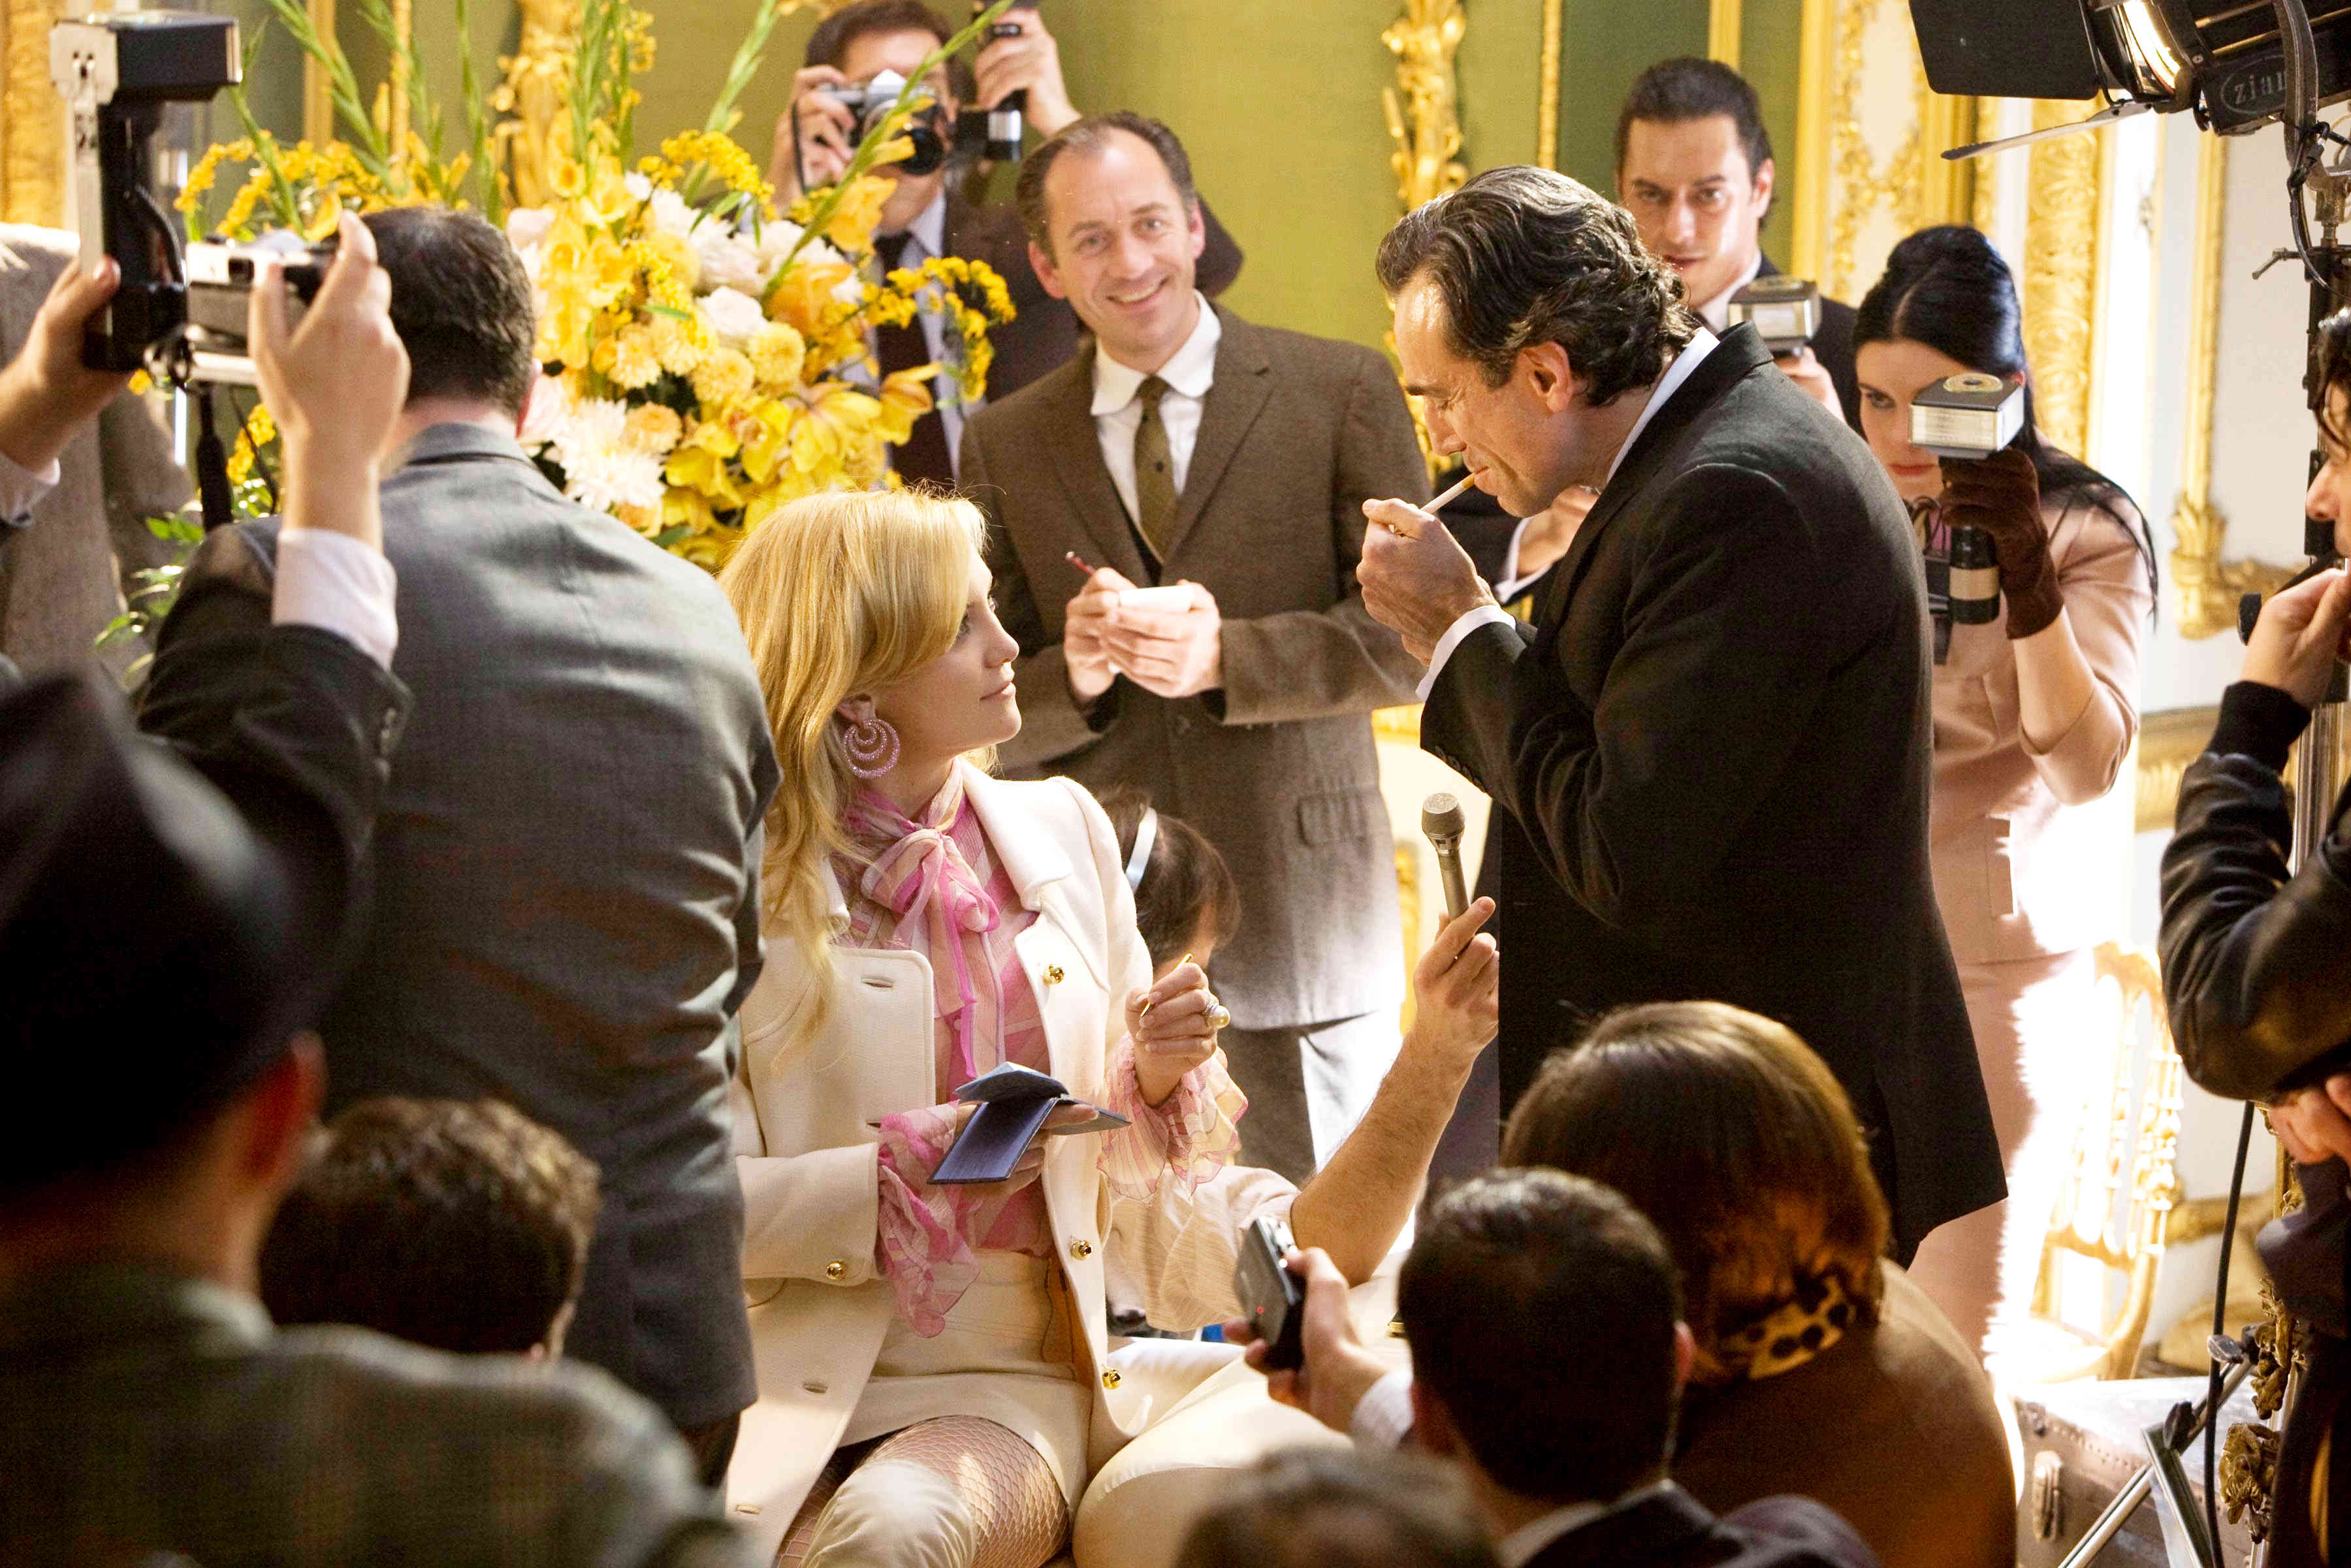 Kate Hudson stars as Stephanie Necrophuros and Daniel Day-Lewis stars as Guido Contini in The Weinstein Company's Nine (2009)